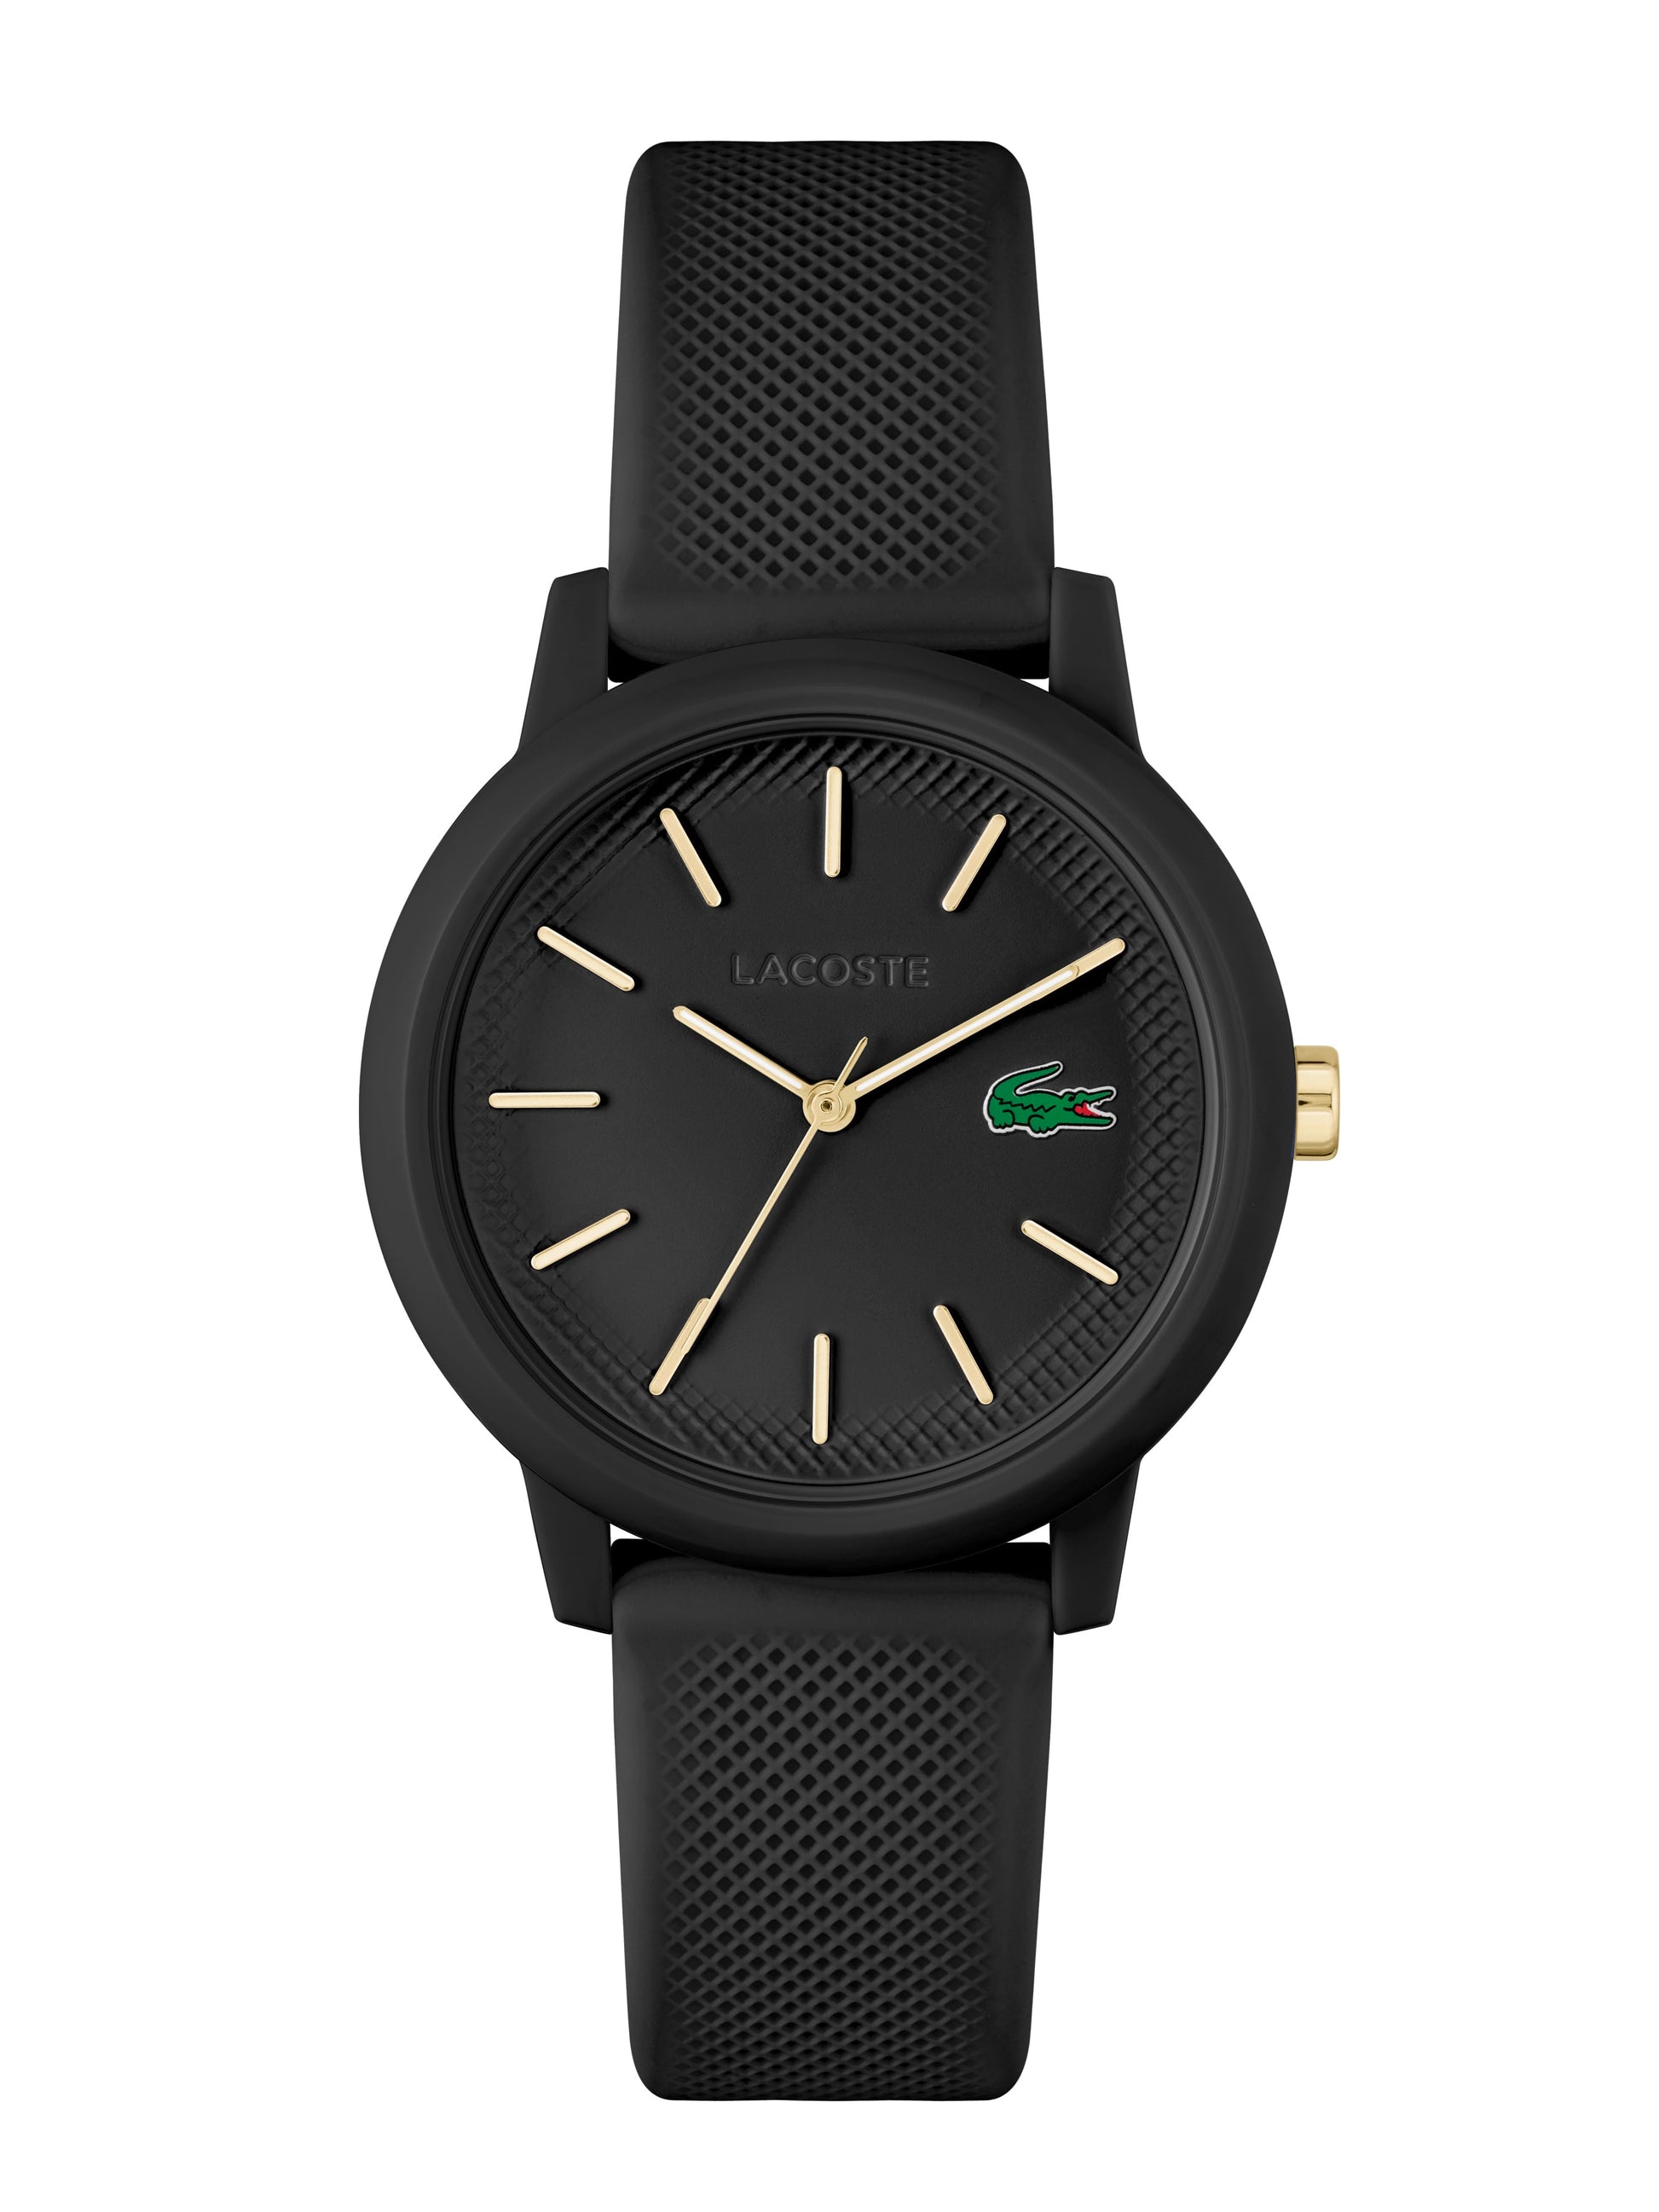 A sporty Lacoste Ladies Lacoste.12.12 Black Watch 2001212 with gold accents.